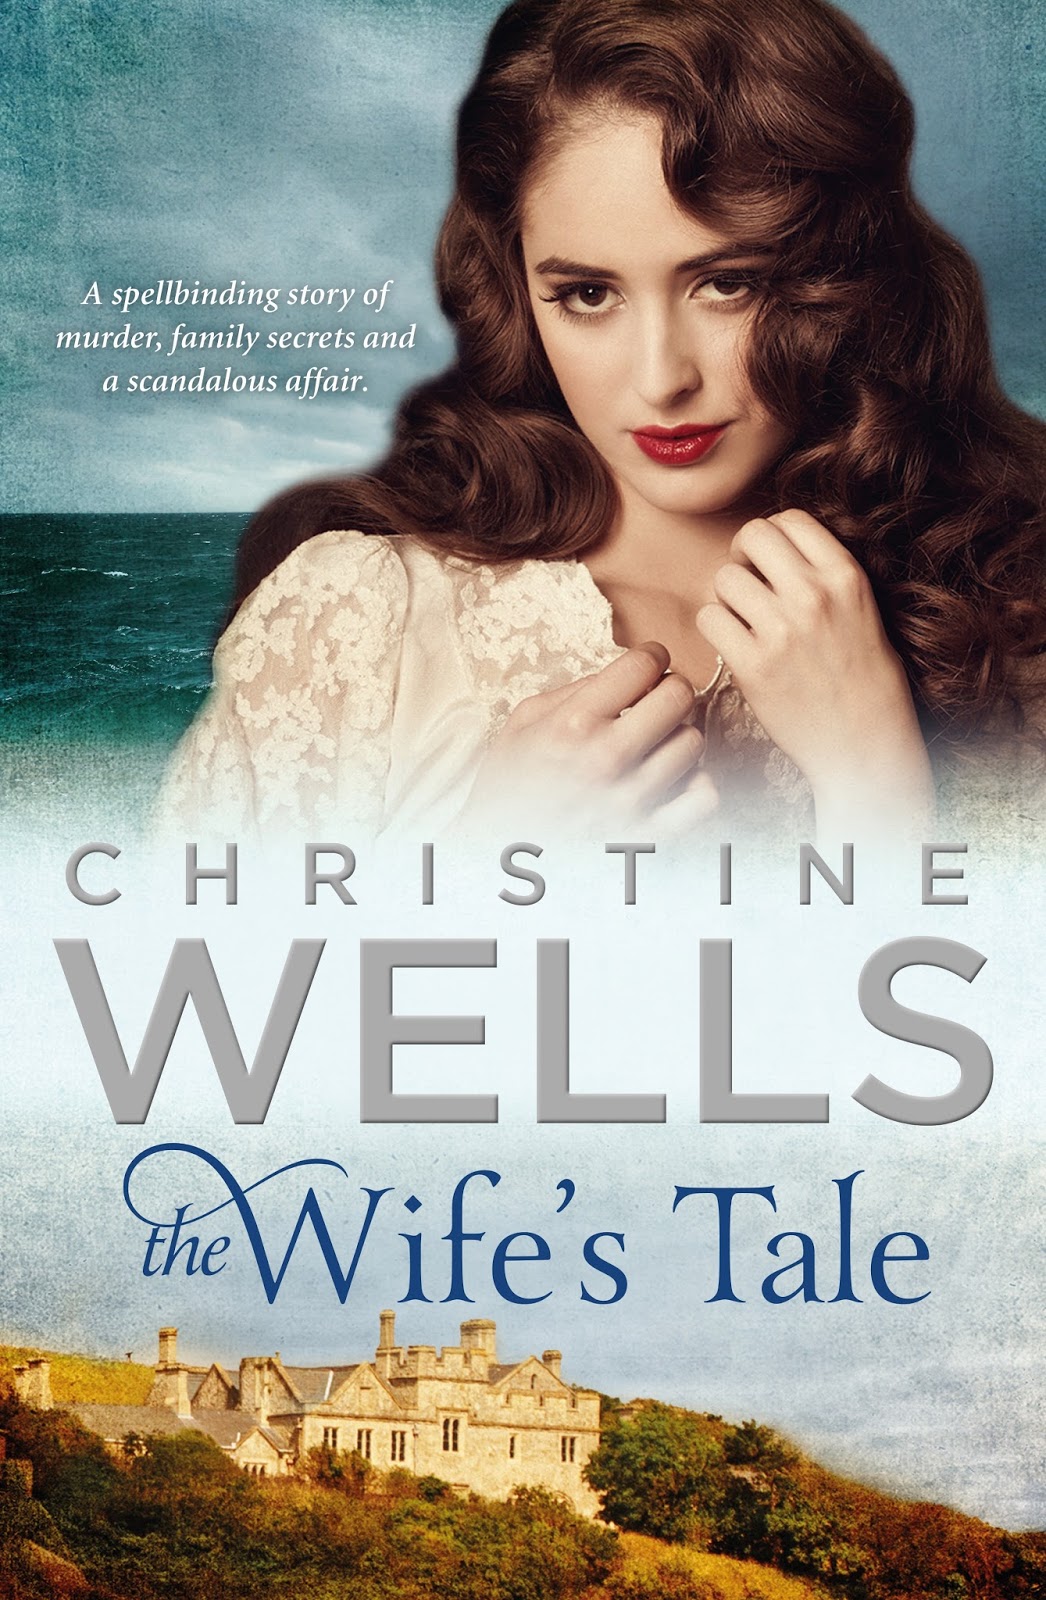 Wives tale. Жена Tales. Christina wells. Cait Lynch. Wives Tales.